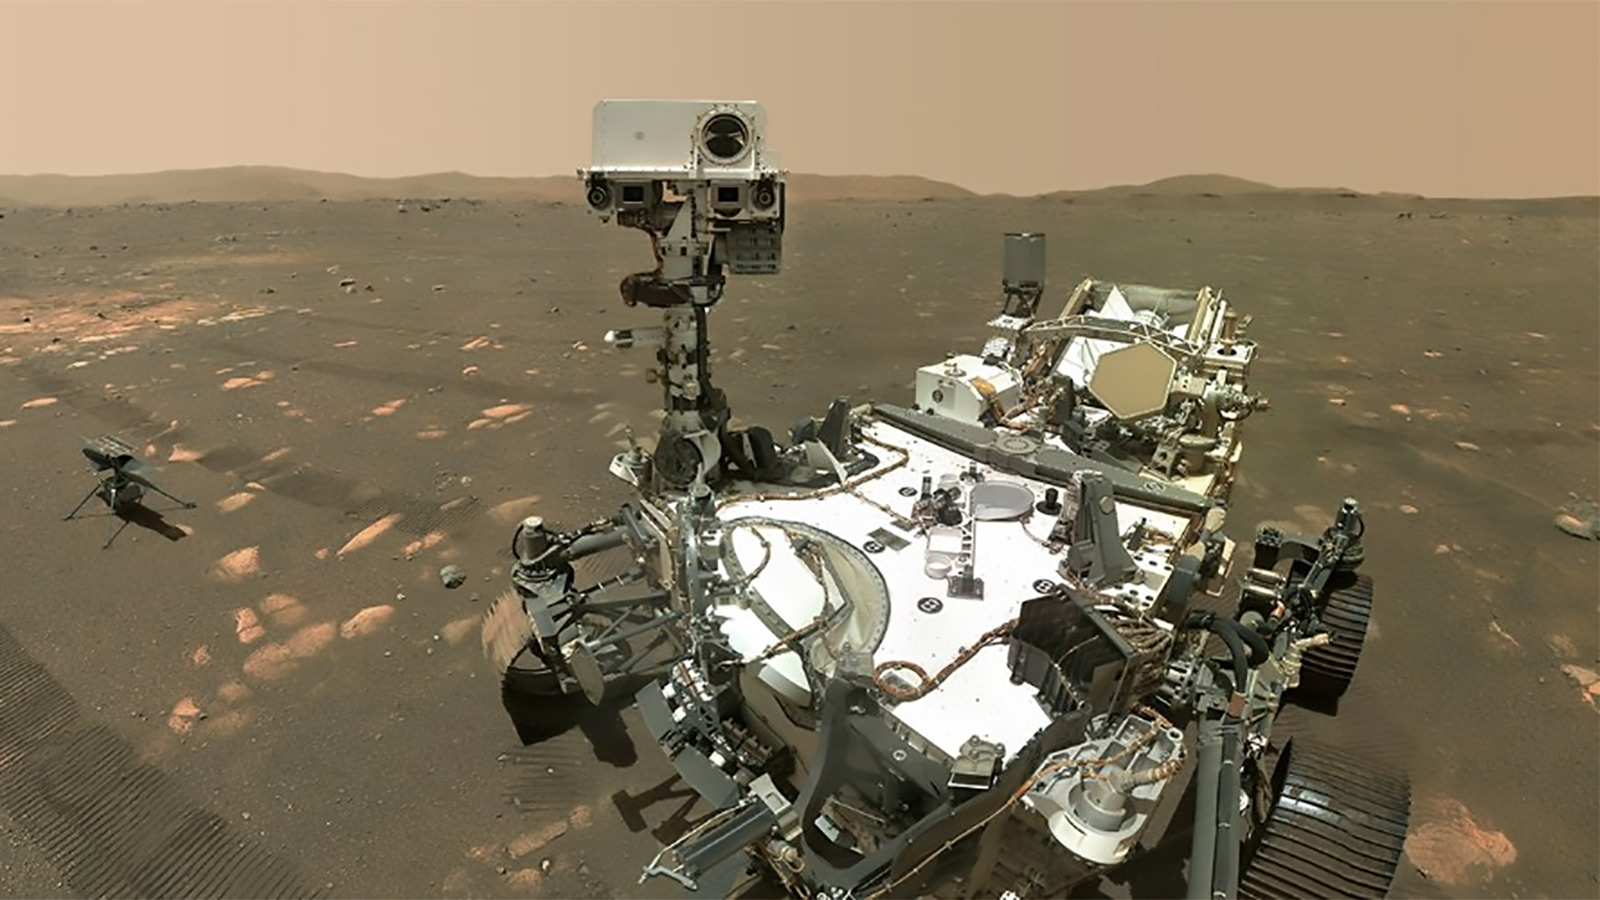 NASA Perseverance rover taking a selfie on Mars